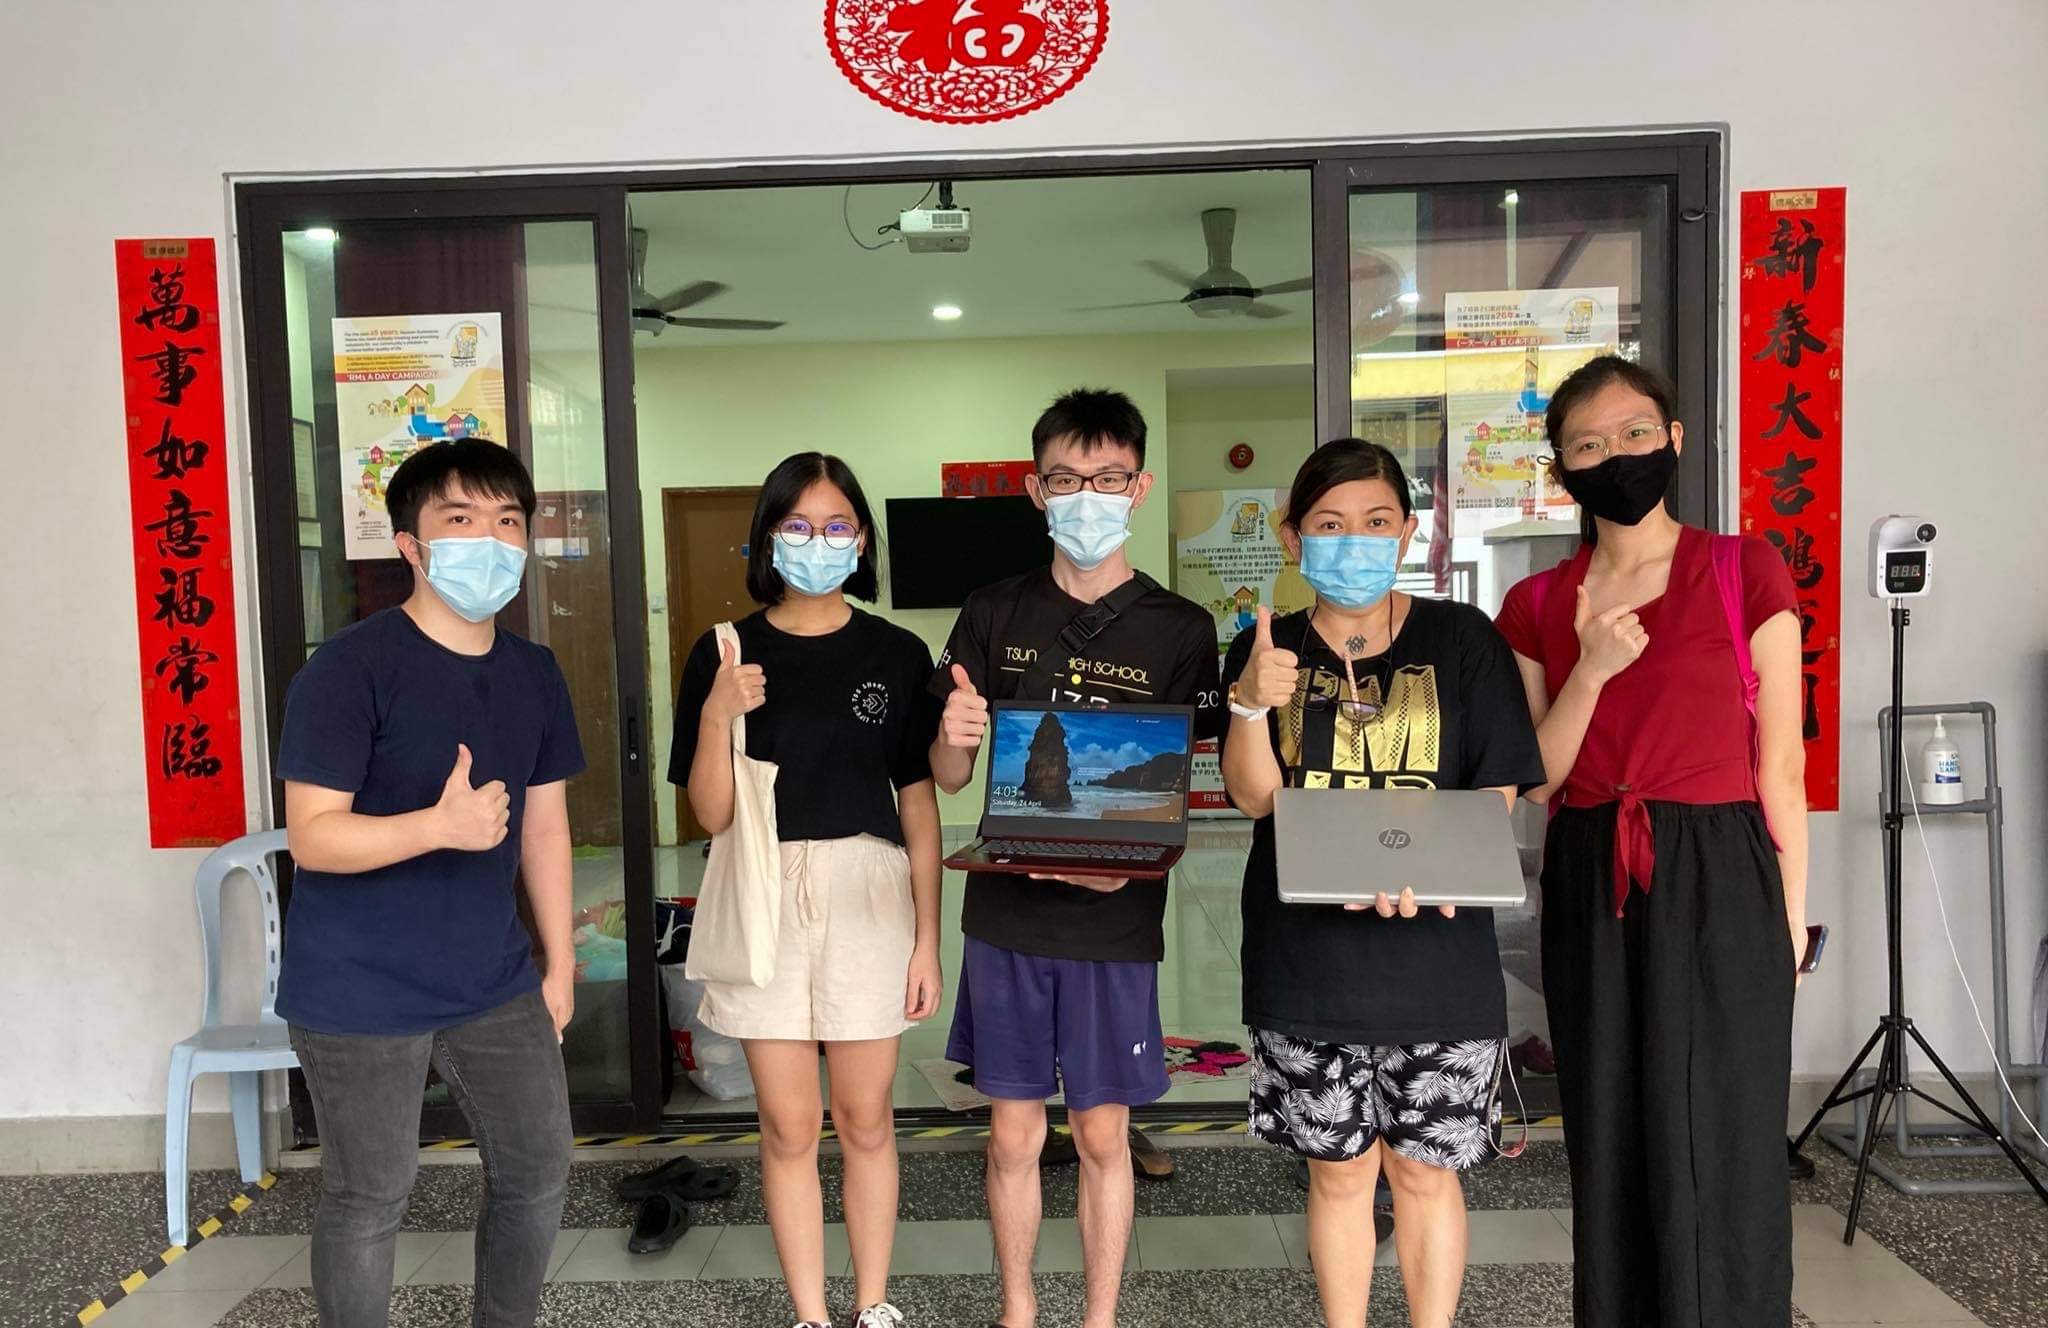 Eight 19yo students' start-up business sell cookies to buy laptops for the needy